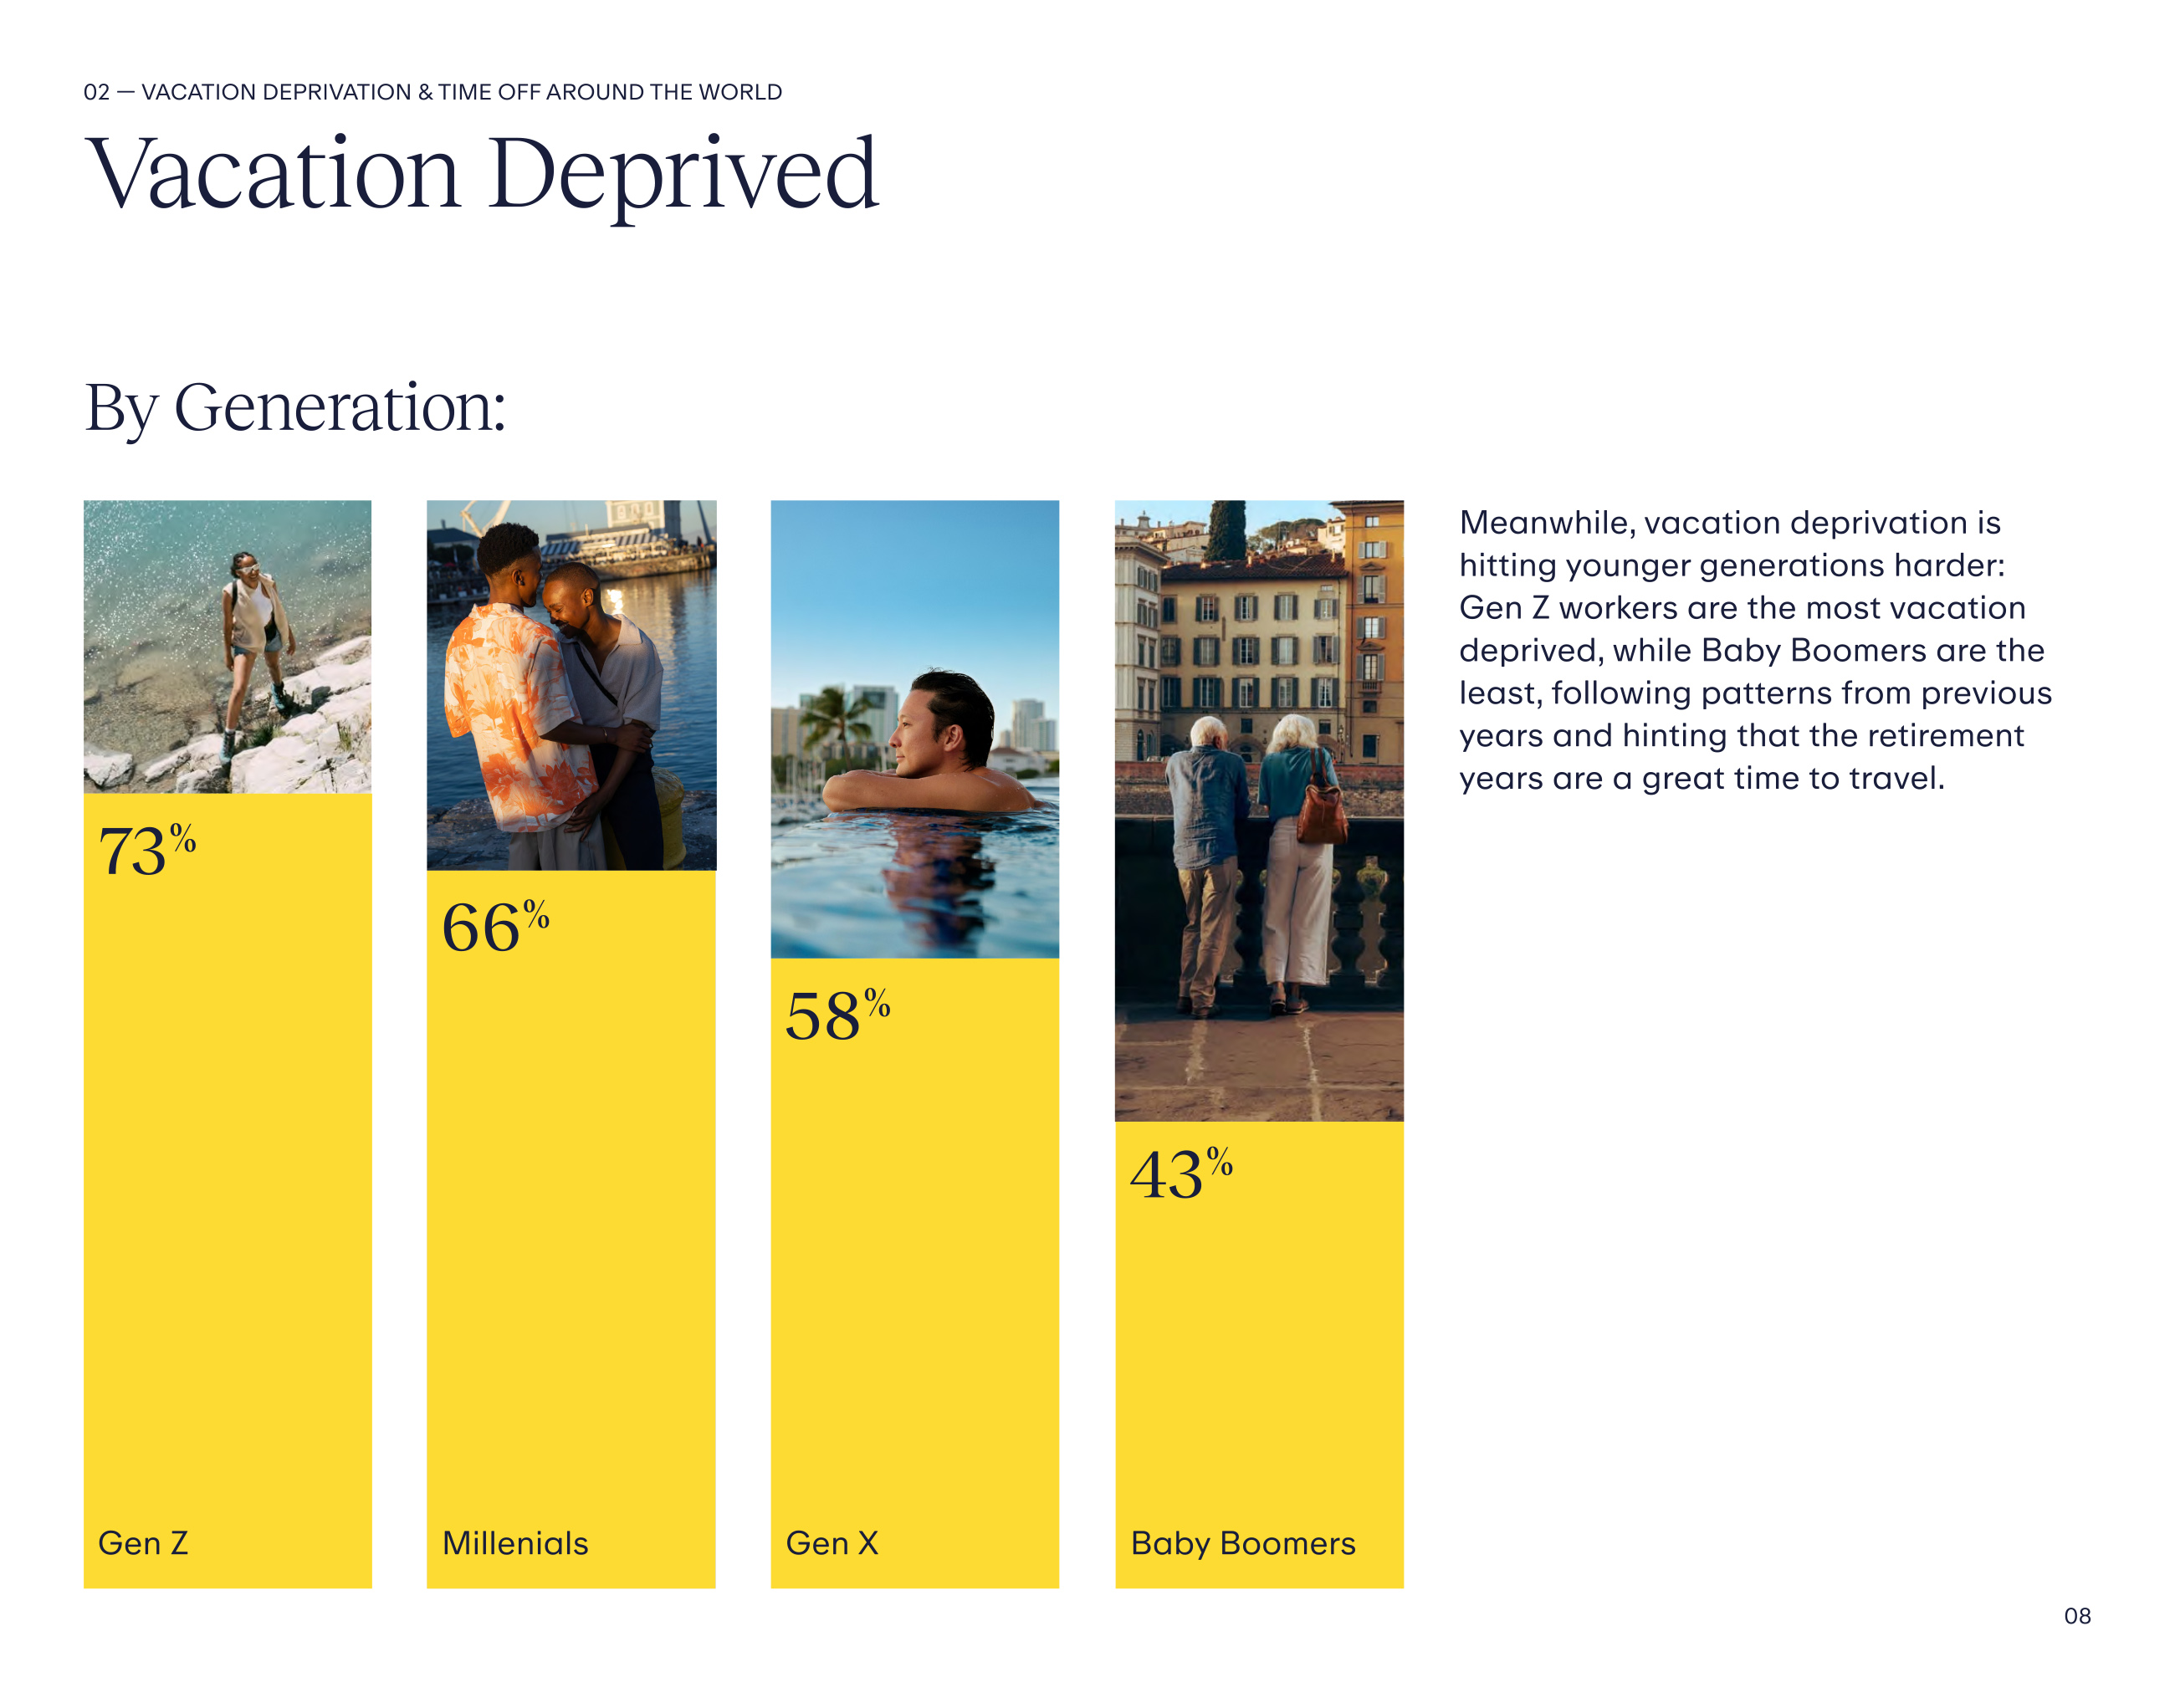 Younger generations are more vacation deprived